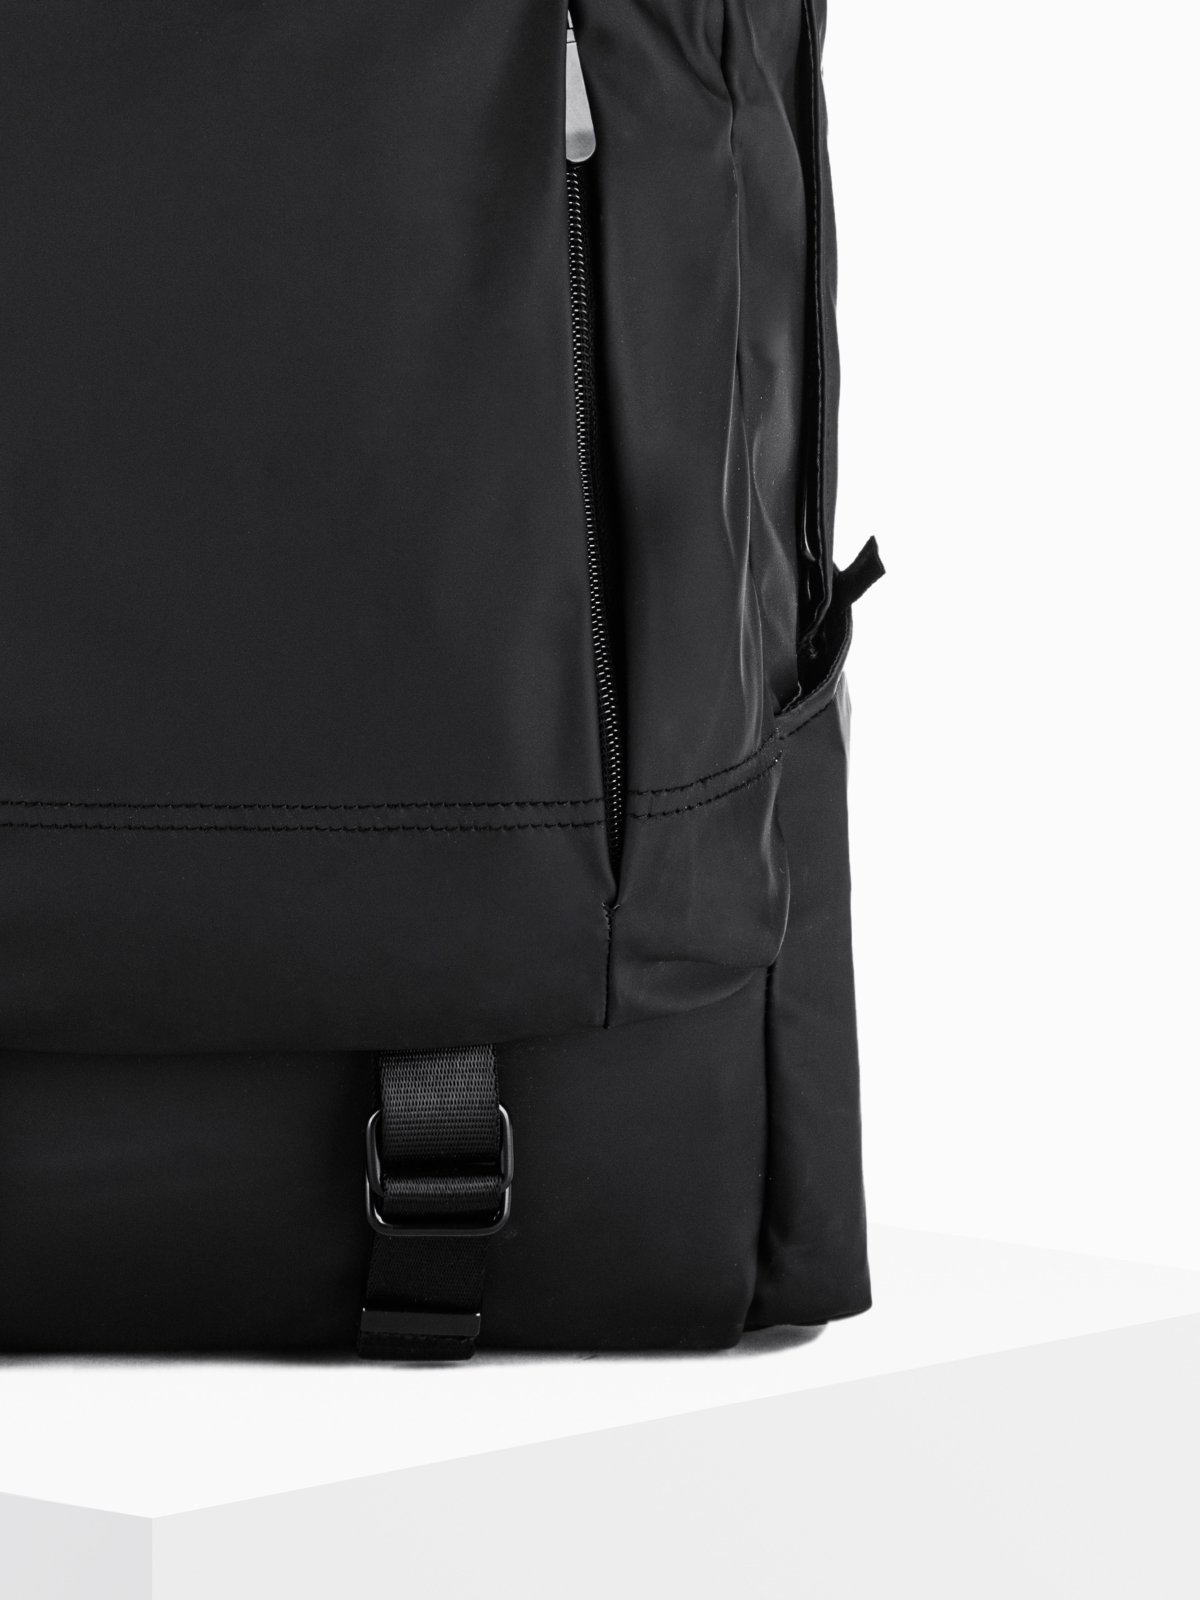 Ombre Clothing Men's backpack A315